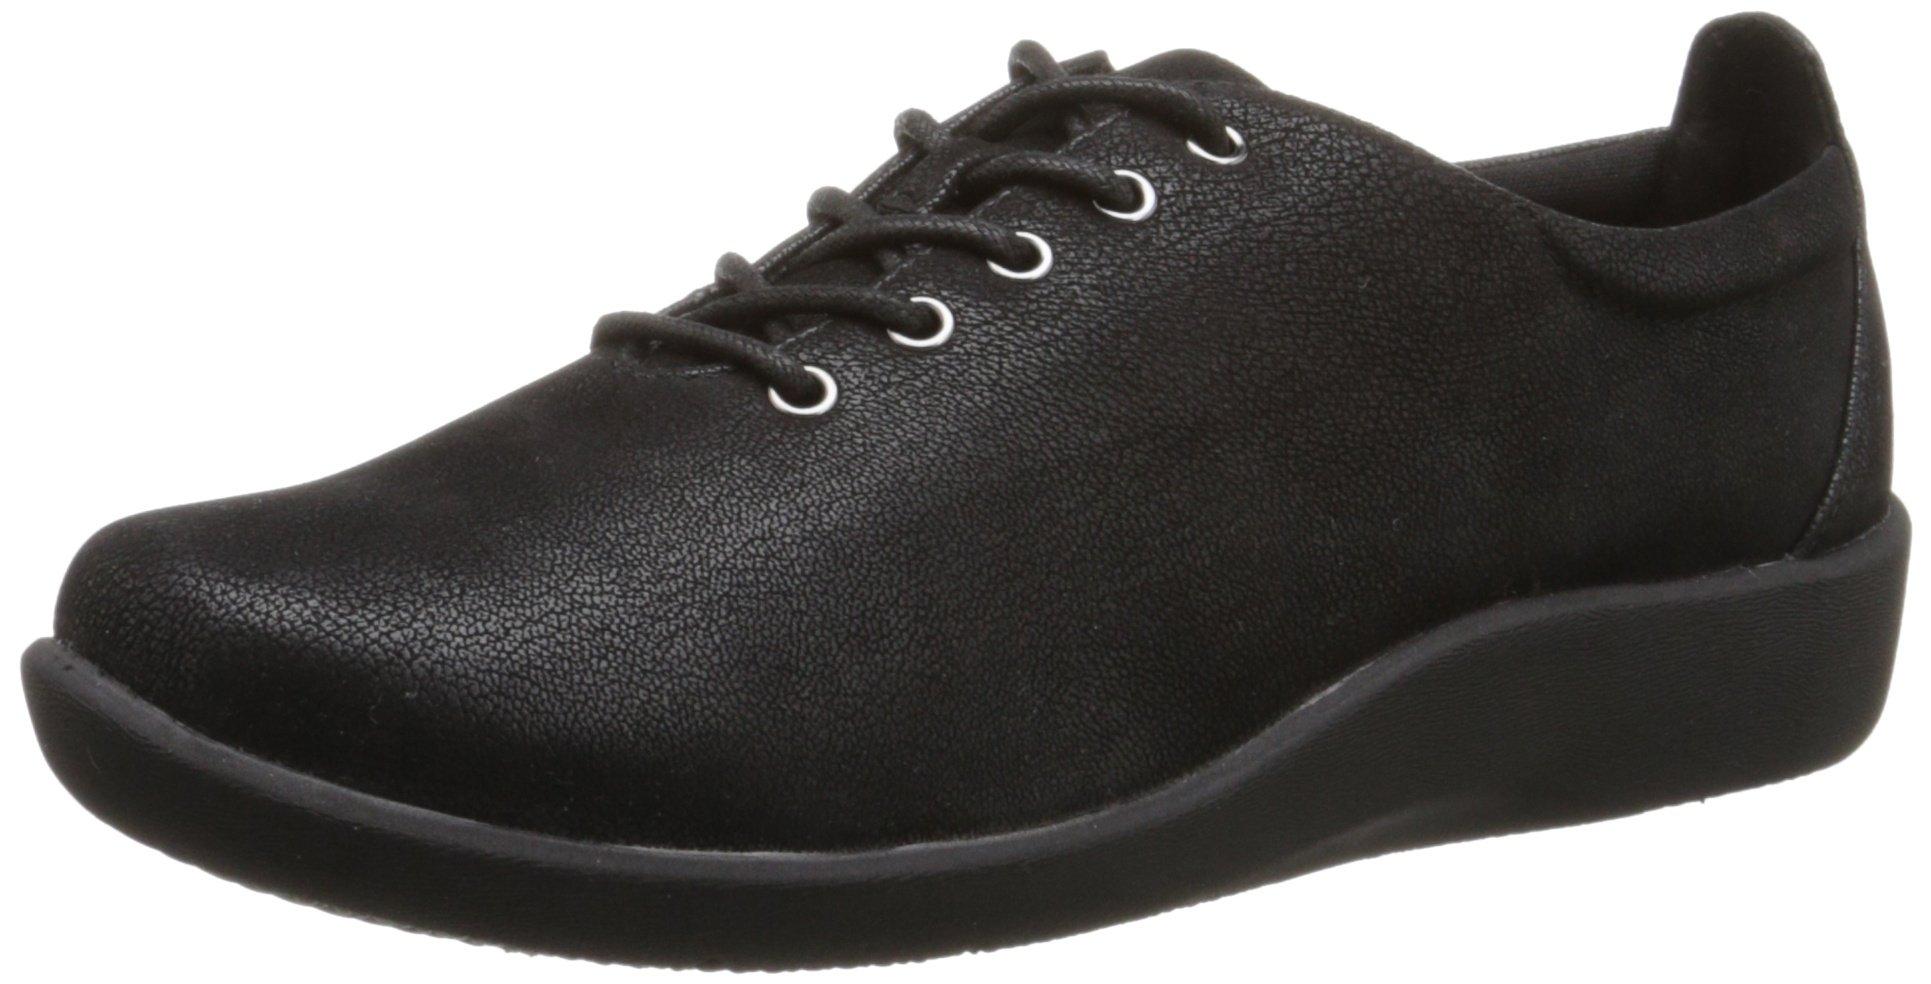 Clarks Cloudsteppers Sillian Tino Lace-up Shoe in Black | Lyst